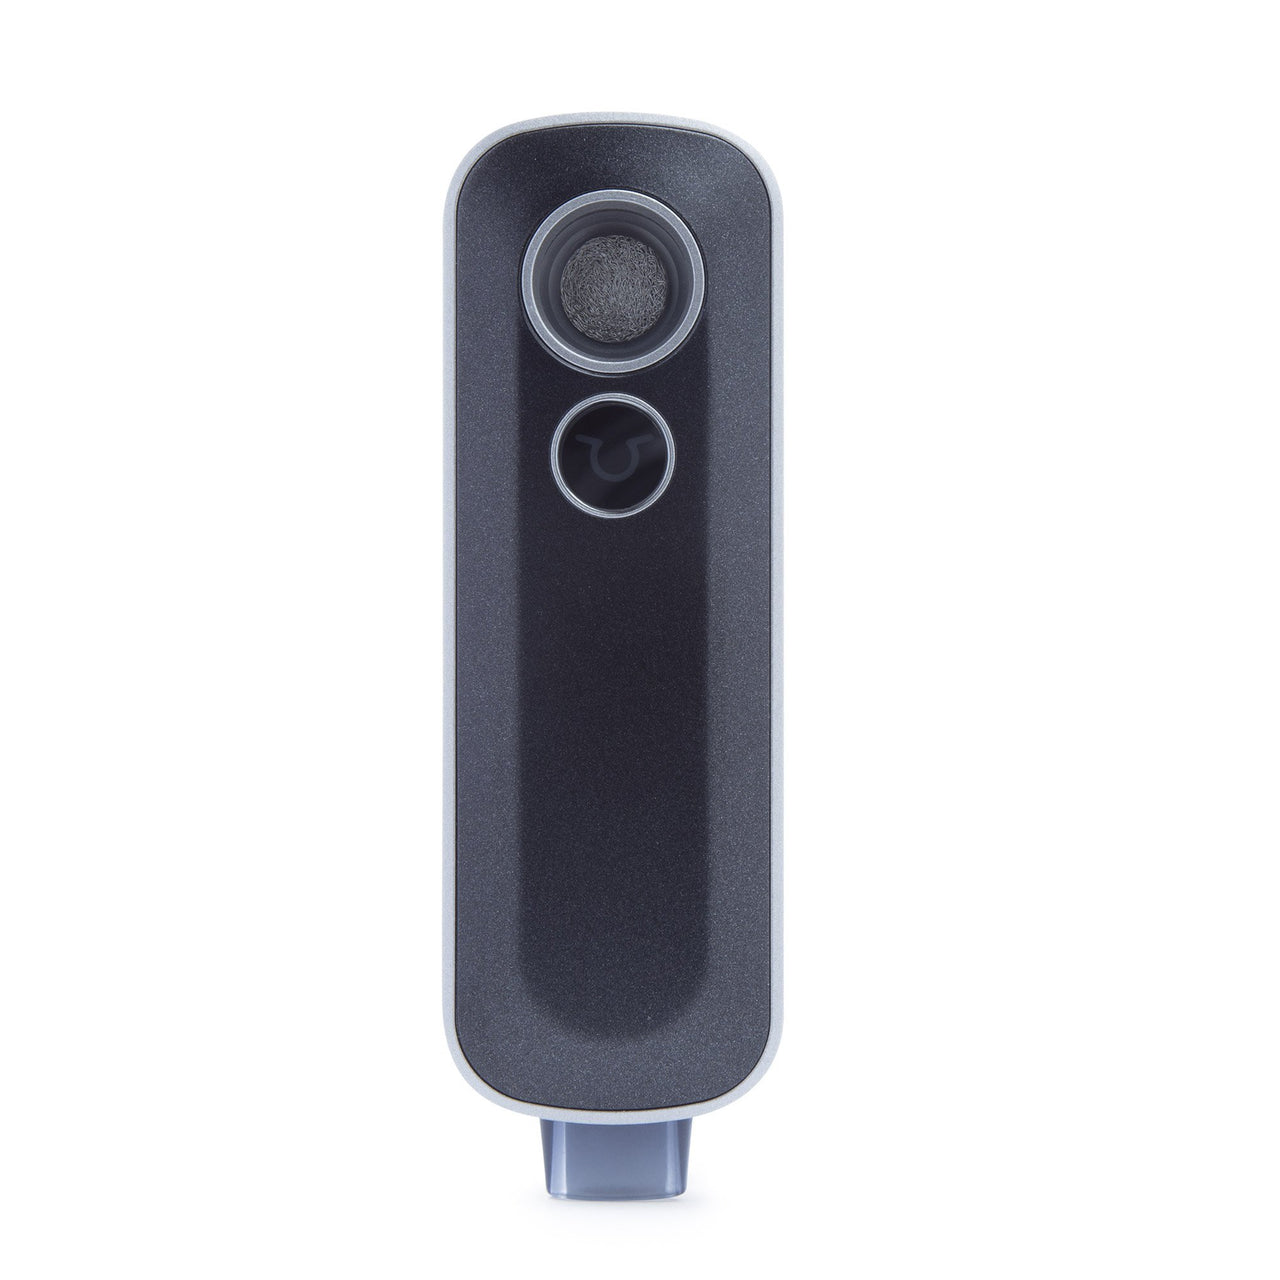 Firefly 2+ Dry Herb Vaporizer - 420 Science - The most trusted online smoke shop.